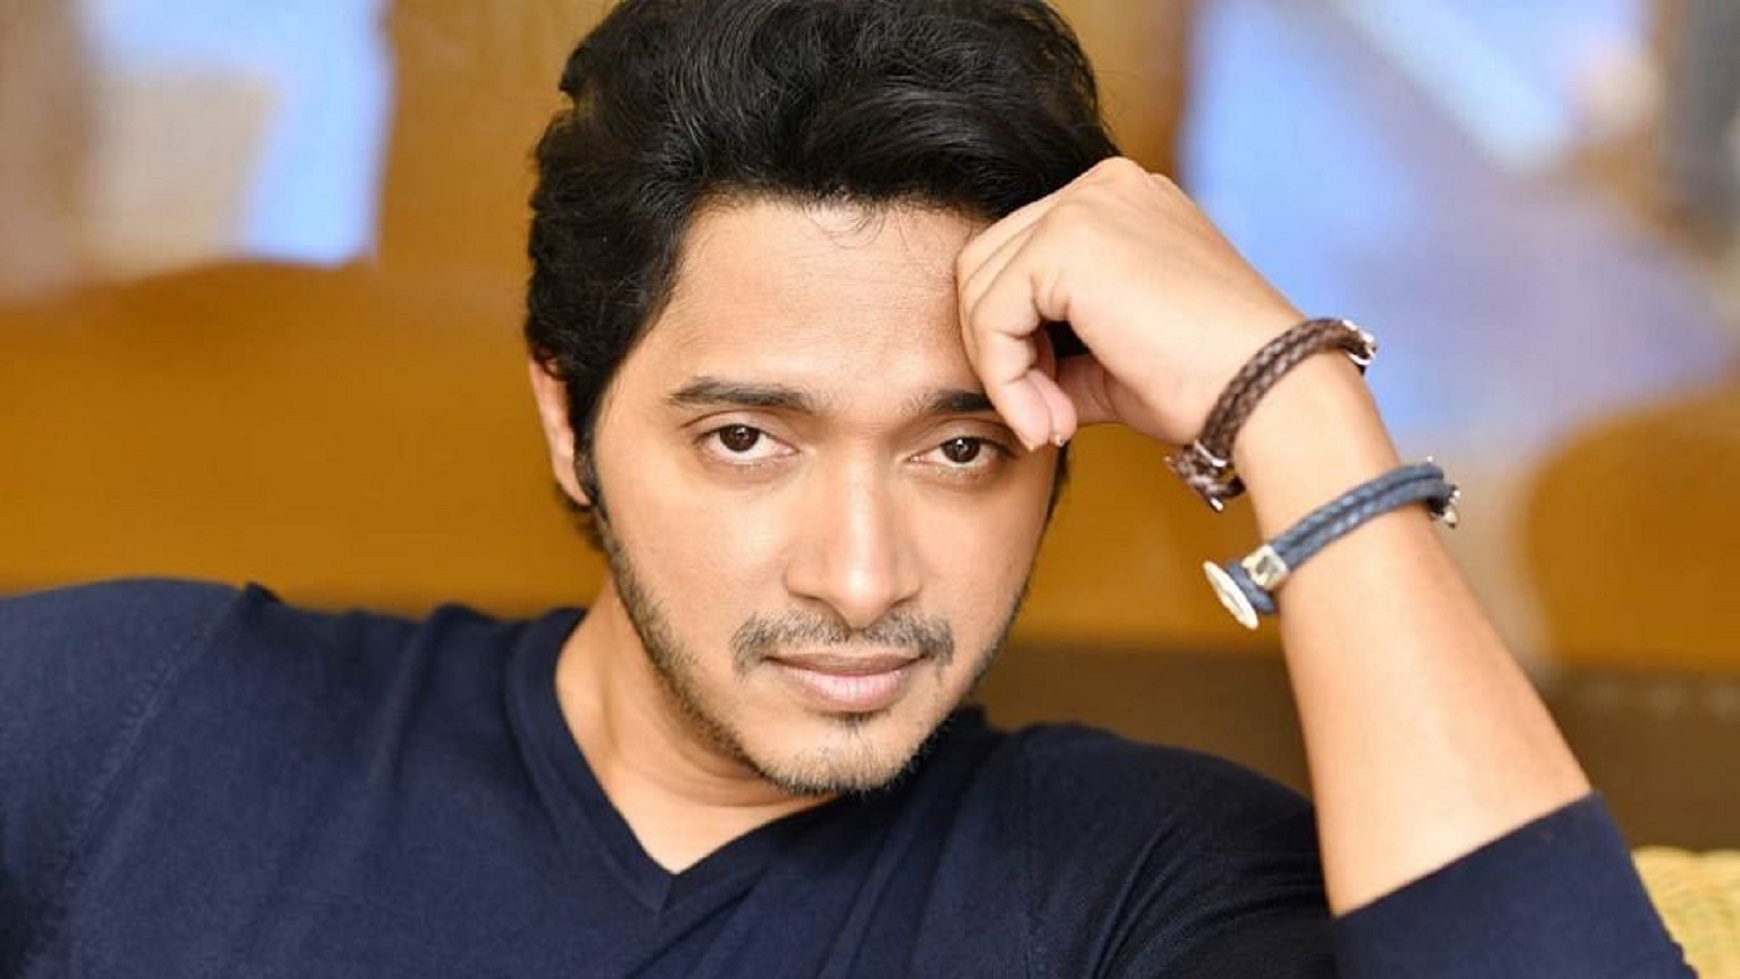 Shreyas Talpade Talks About Losing Films in Bollywood: “Friends Stab Your Back For Films”